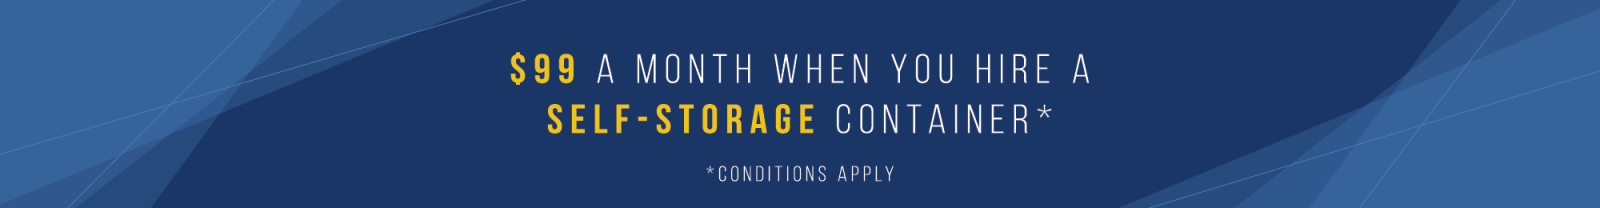 $99 a month when you hire a self storage container. Conditions apply.